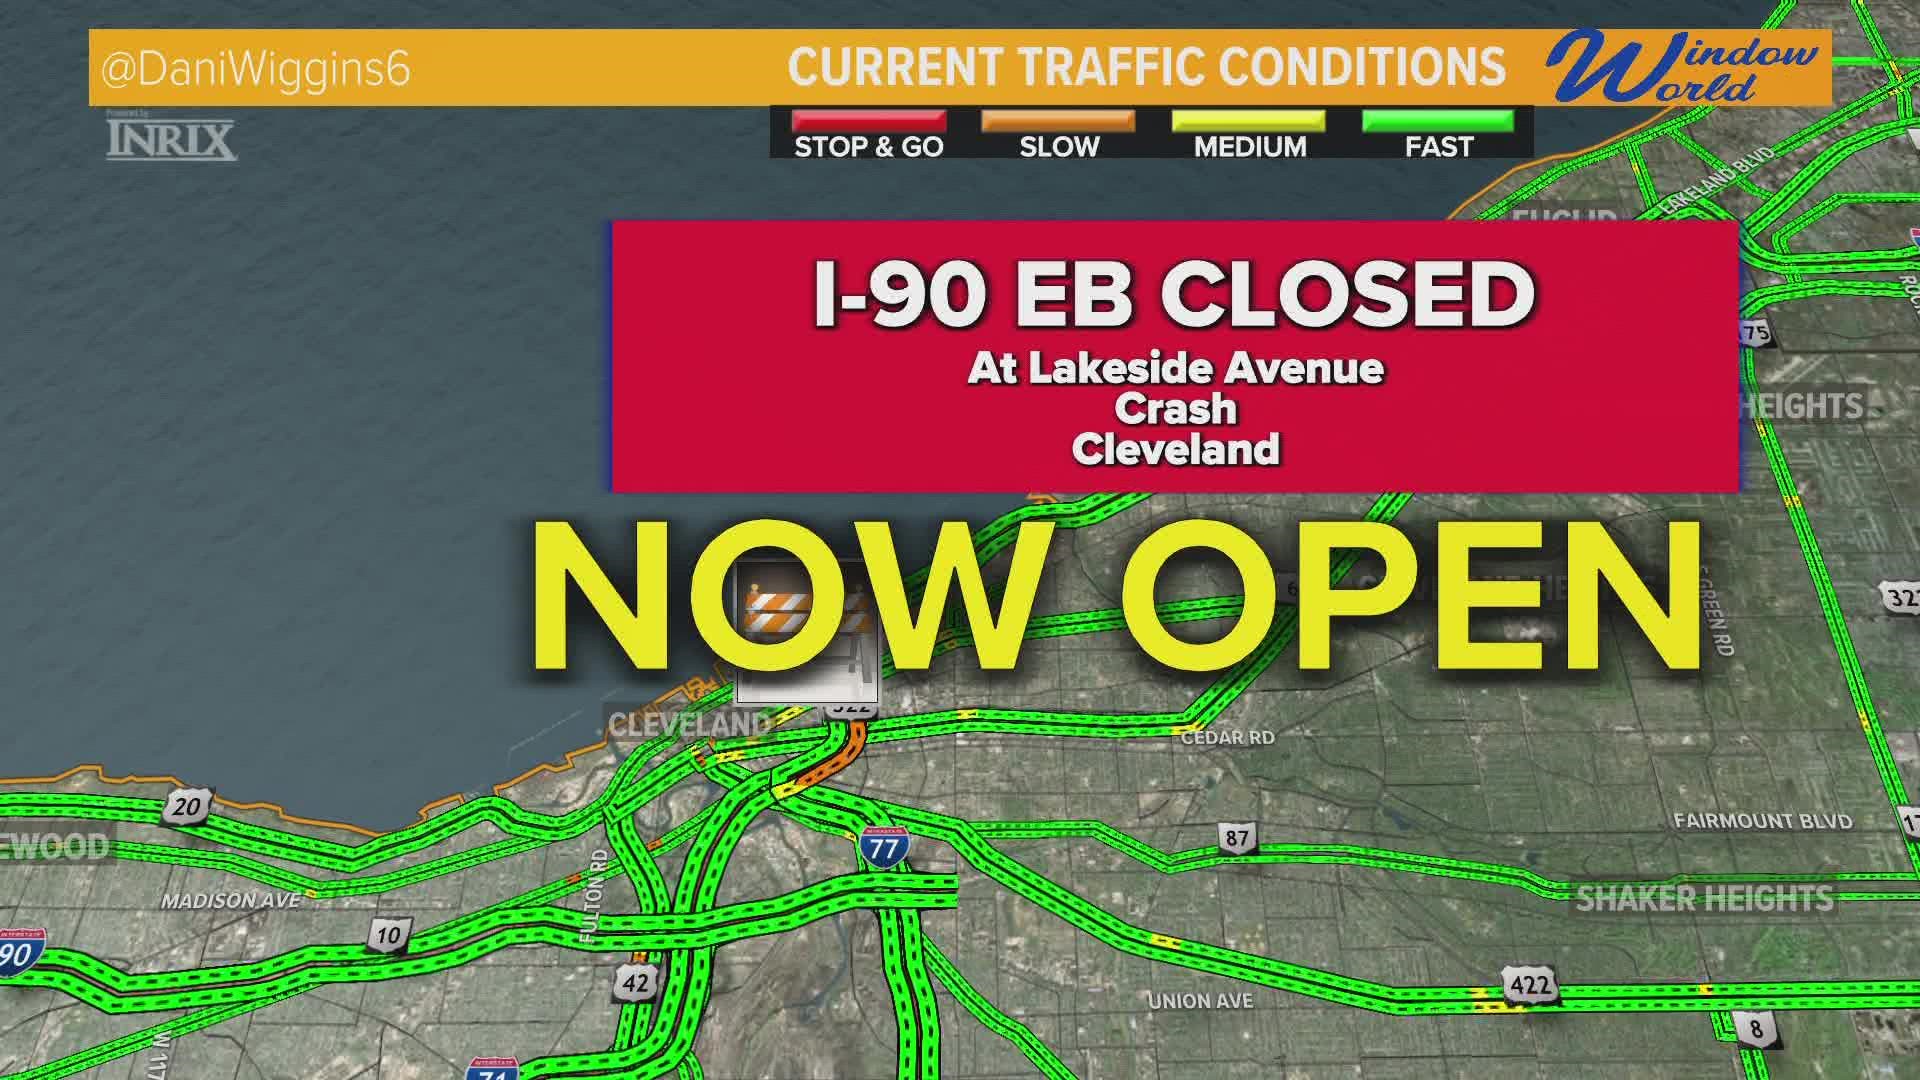 Drivers can now access I-90 East through Dead Man's Curve in downtown Cleveland after a crash early Thursday morning closed the roadway at Lakeside Avenue.